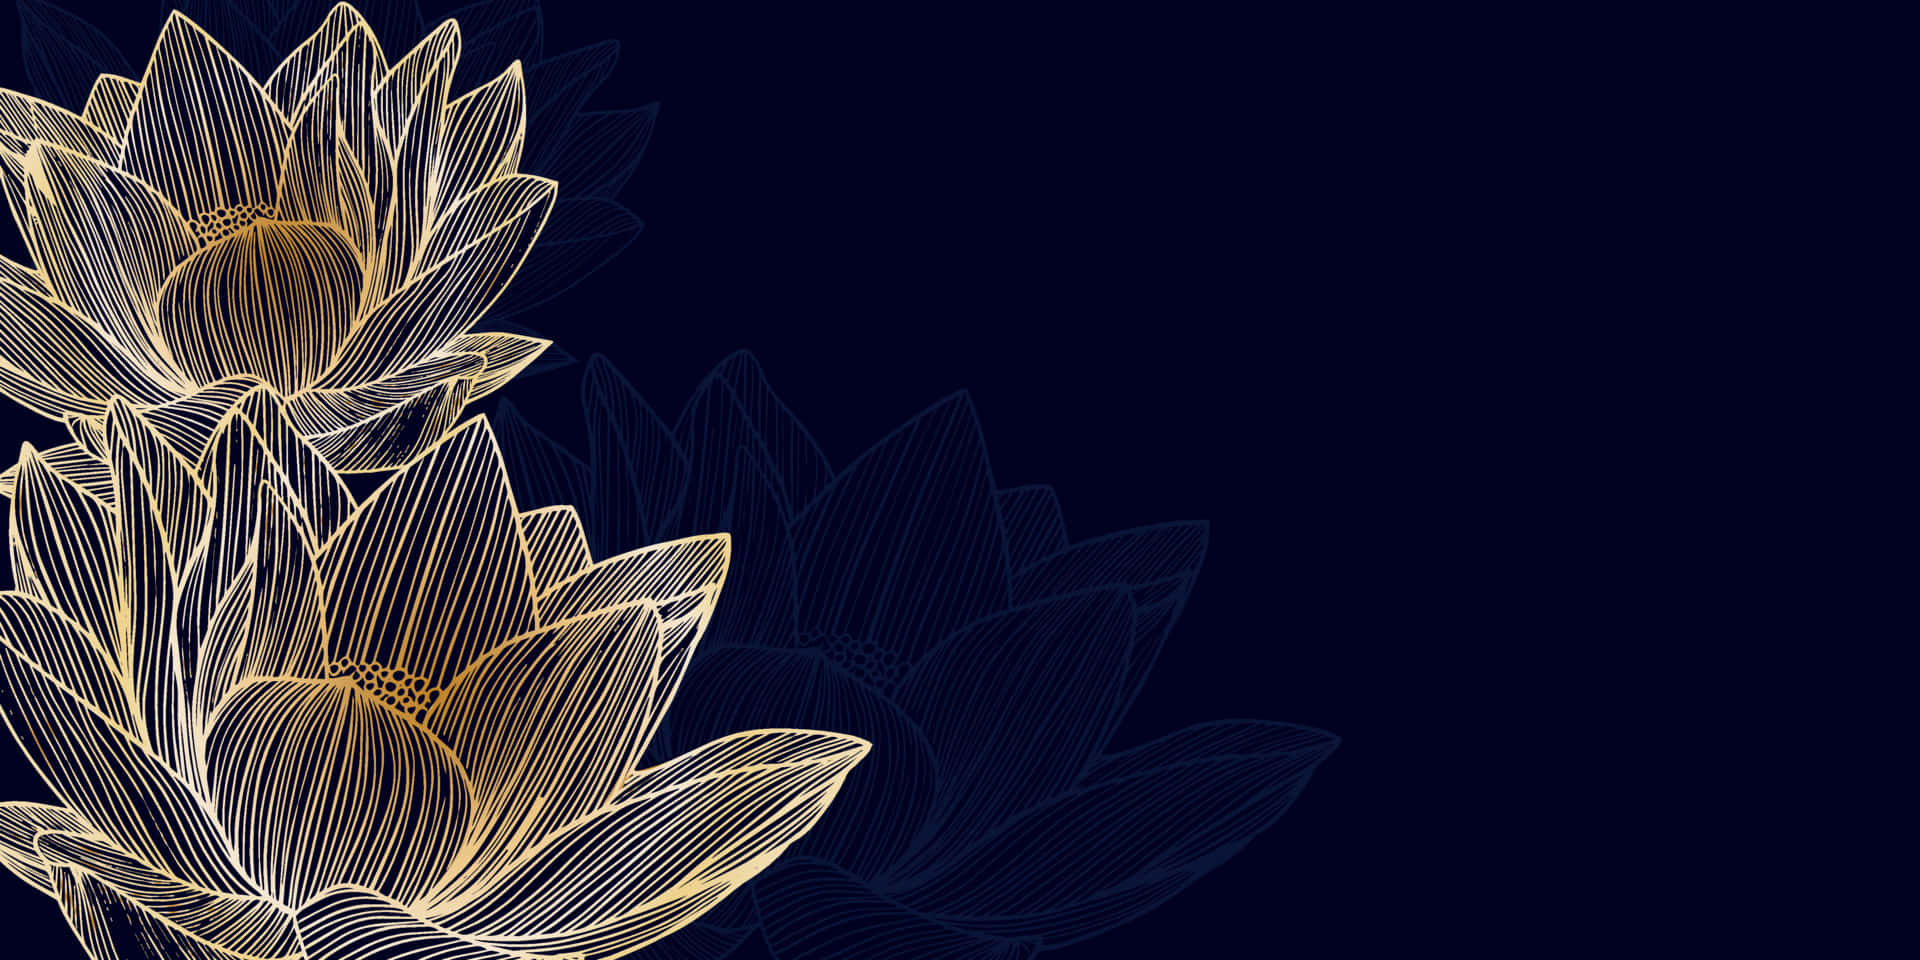 A tranquil image of lotus flowers blooming in a lake to create an aura of serenity